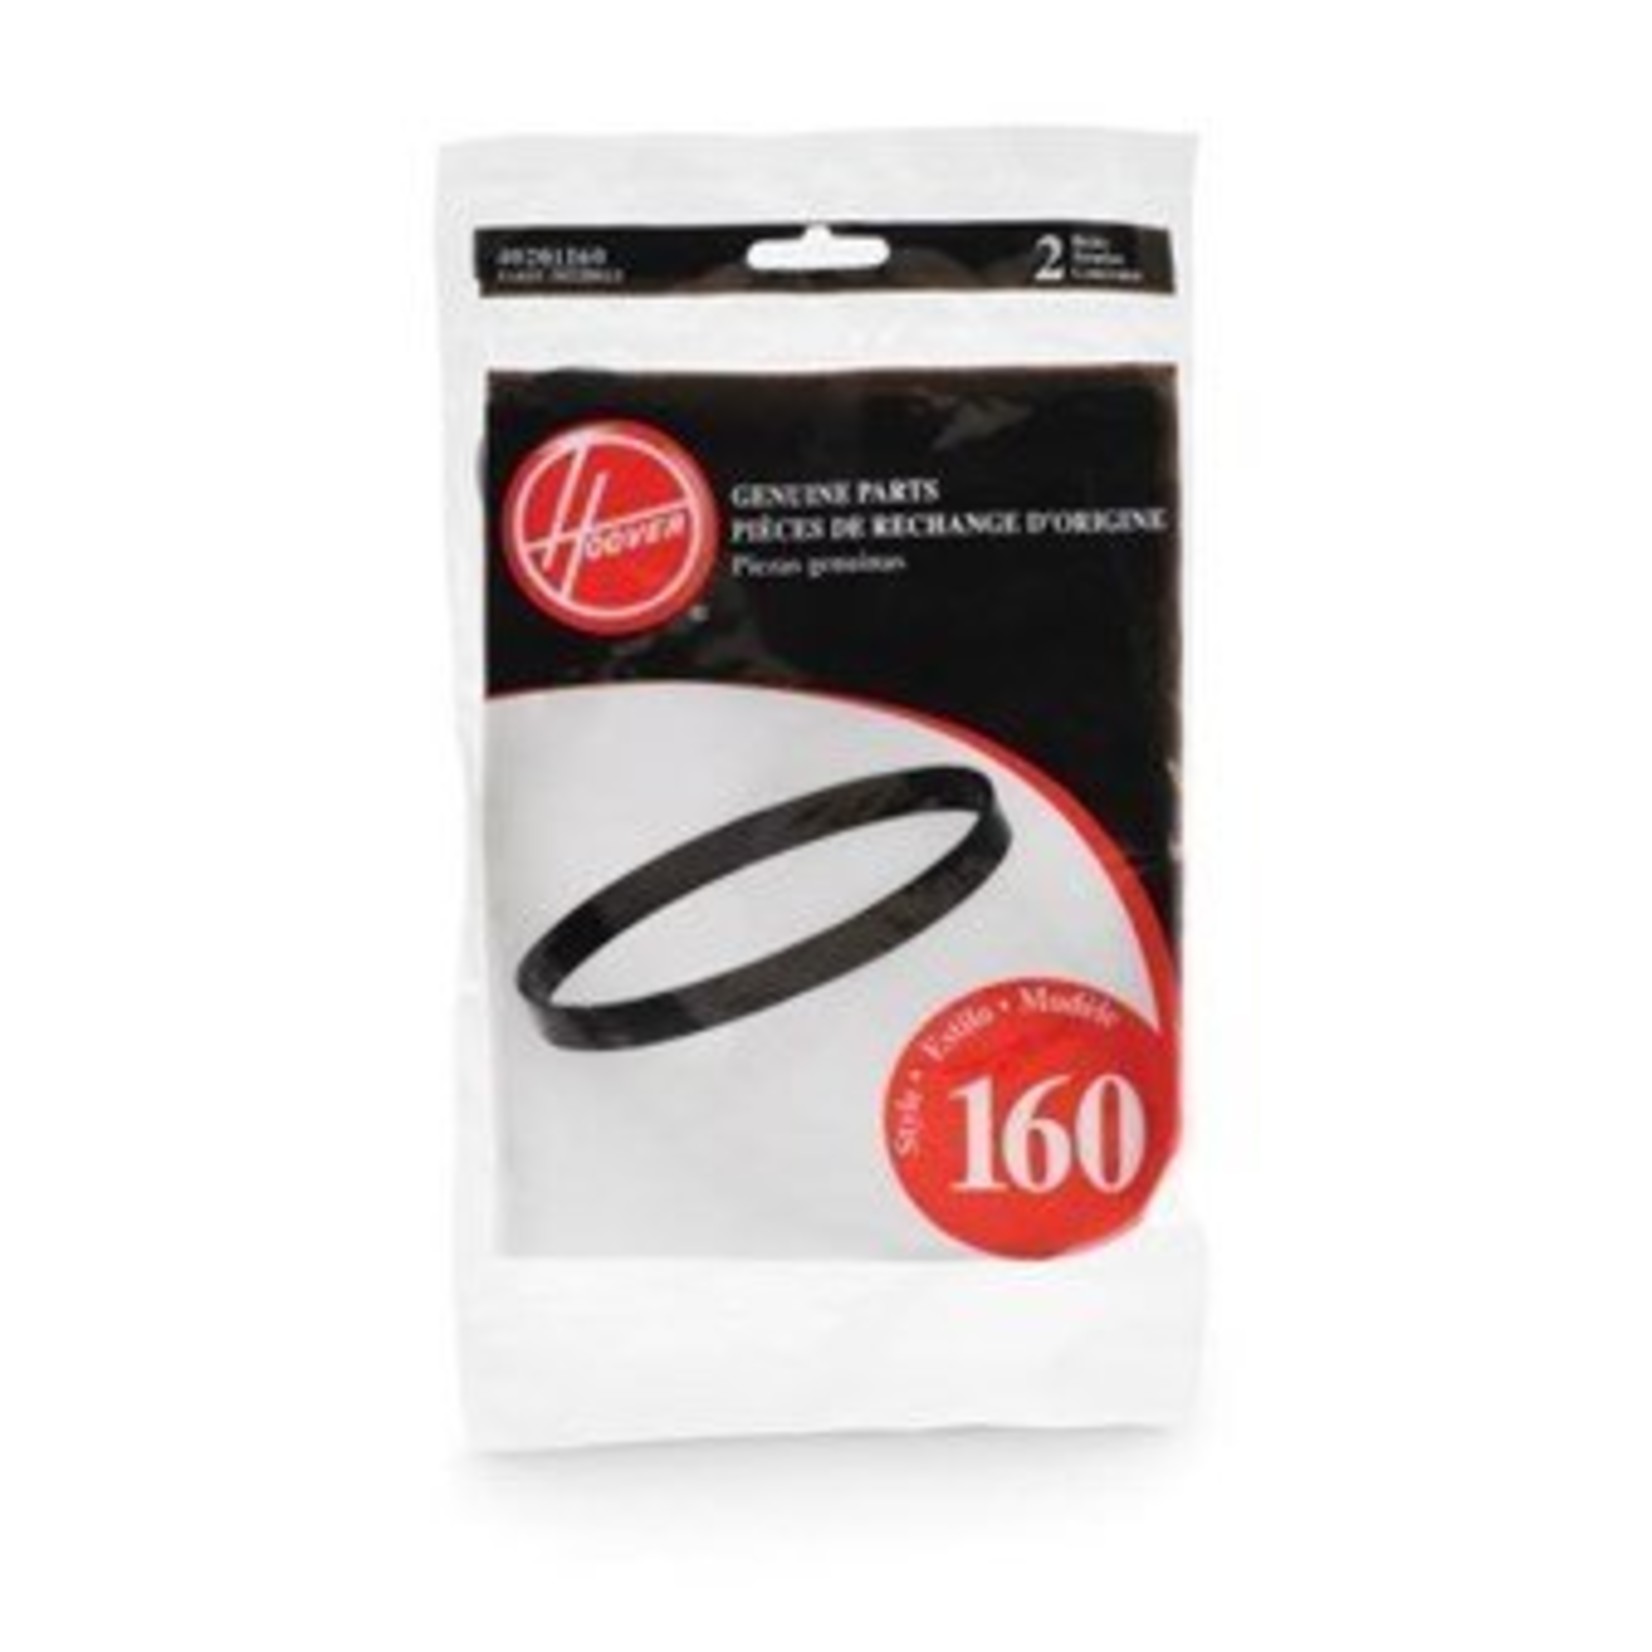 Hoover Hoover Non Self-Propelled Windtunnel Style 160 & 58 Belt (2pk)